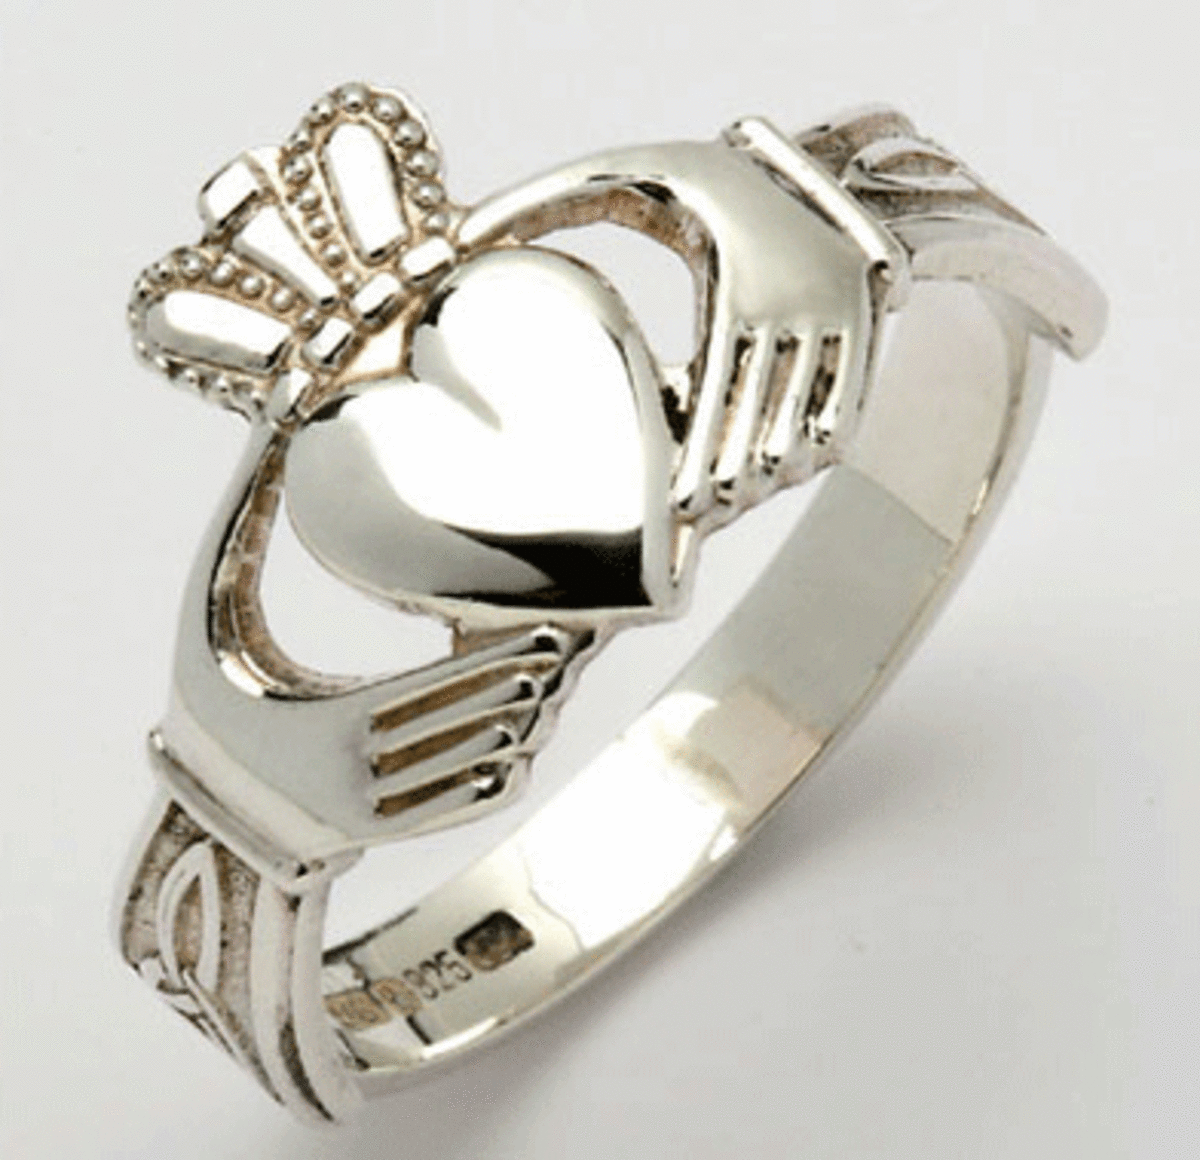 A Claddagh can be a beautiful, deeply symbolic wedding ring or a meaningful gift for a friend.